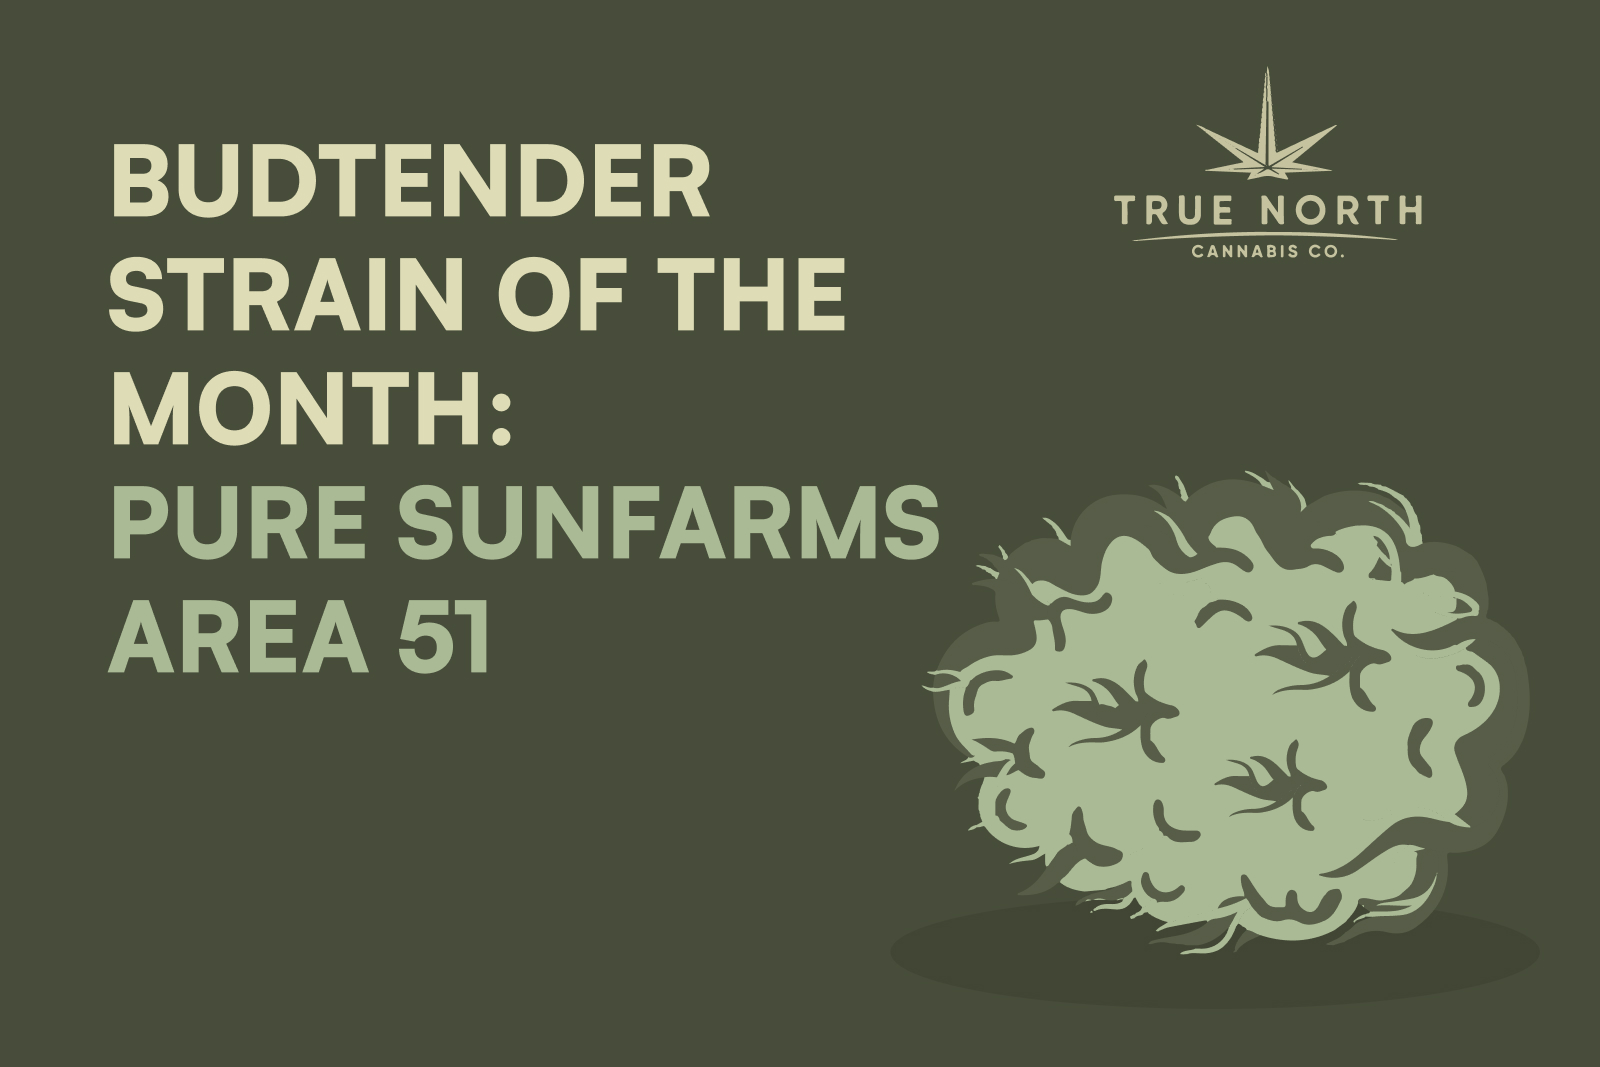 A custom graphic depicting TNCC’s budtender strain of the month: Pure Sunfarms Area 51